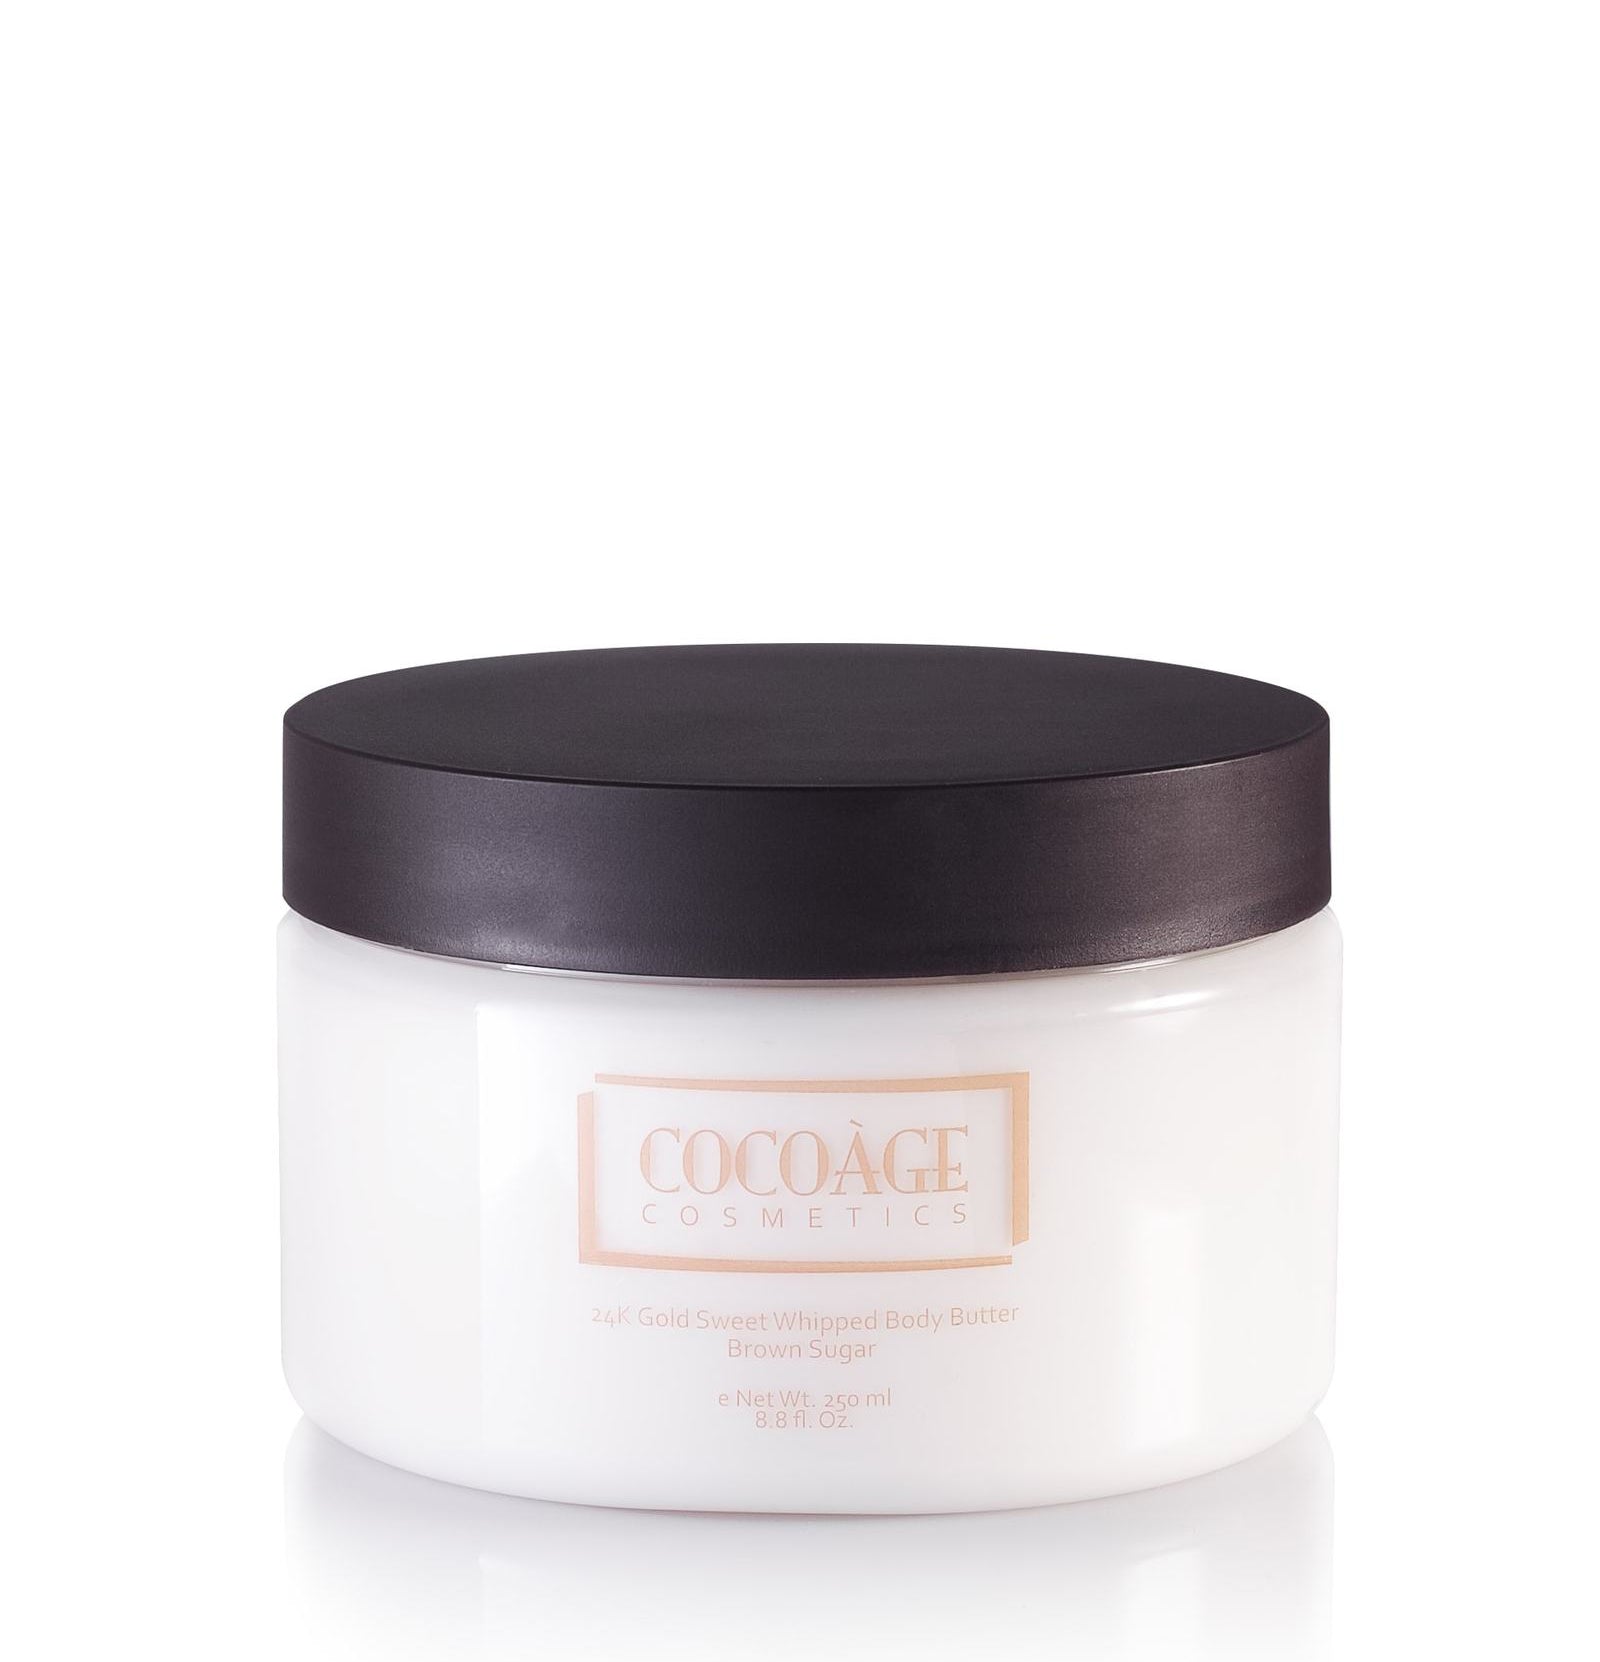 Cocoàge - 24K Gold Sweet Whipped Body Butter - Brown Sugar